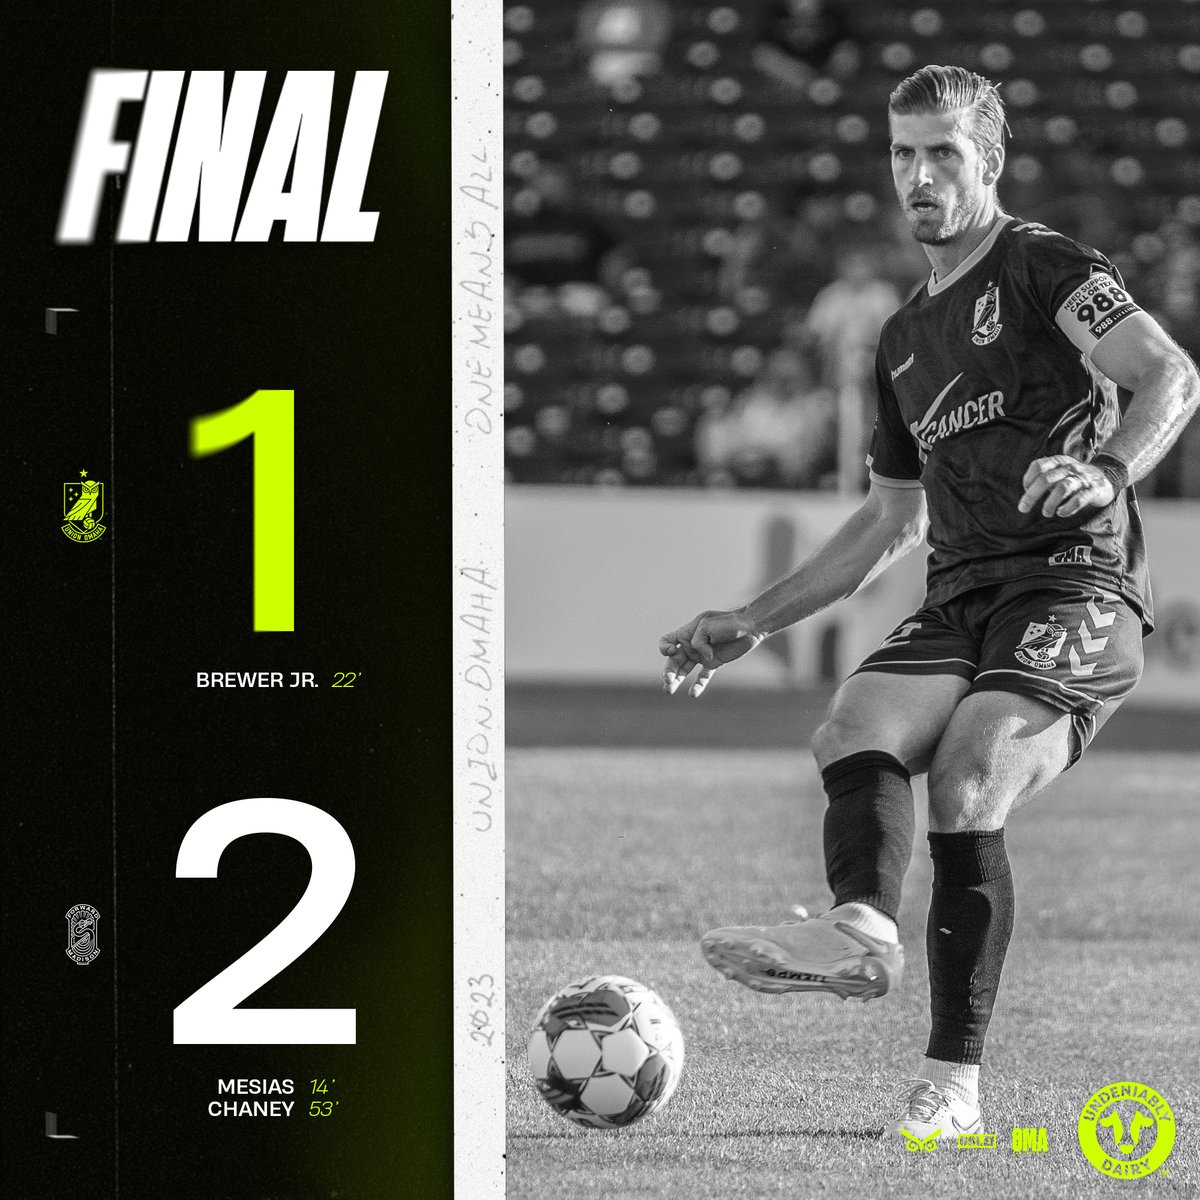 𝗙𝗜𝗡𝗔𝗟 | 1-2

Our unbeaten run comes to an end tonight. We'll be back in action next Saturday with a chance to put it right. 👊

@UndeniablyDairy @MidwestDairy | #OMAvMAD